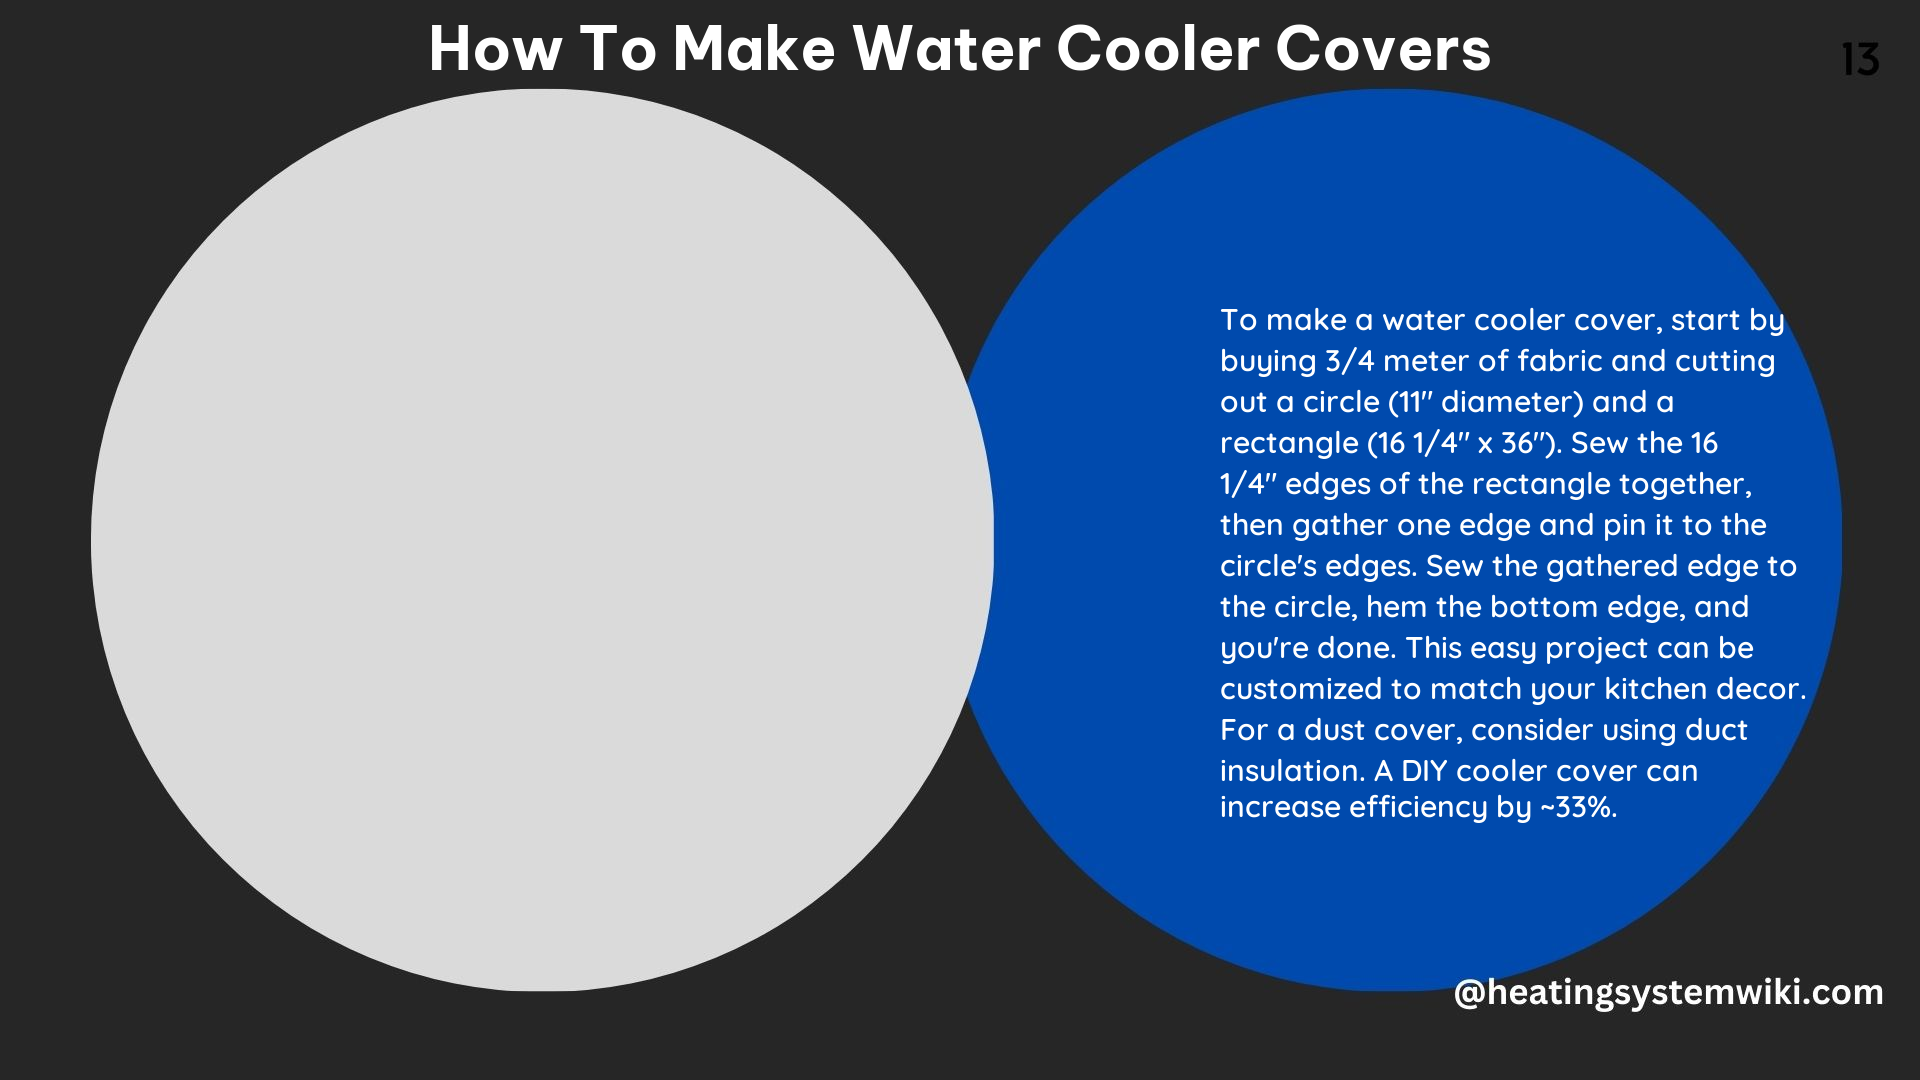 How to Make Water Cooler Covers